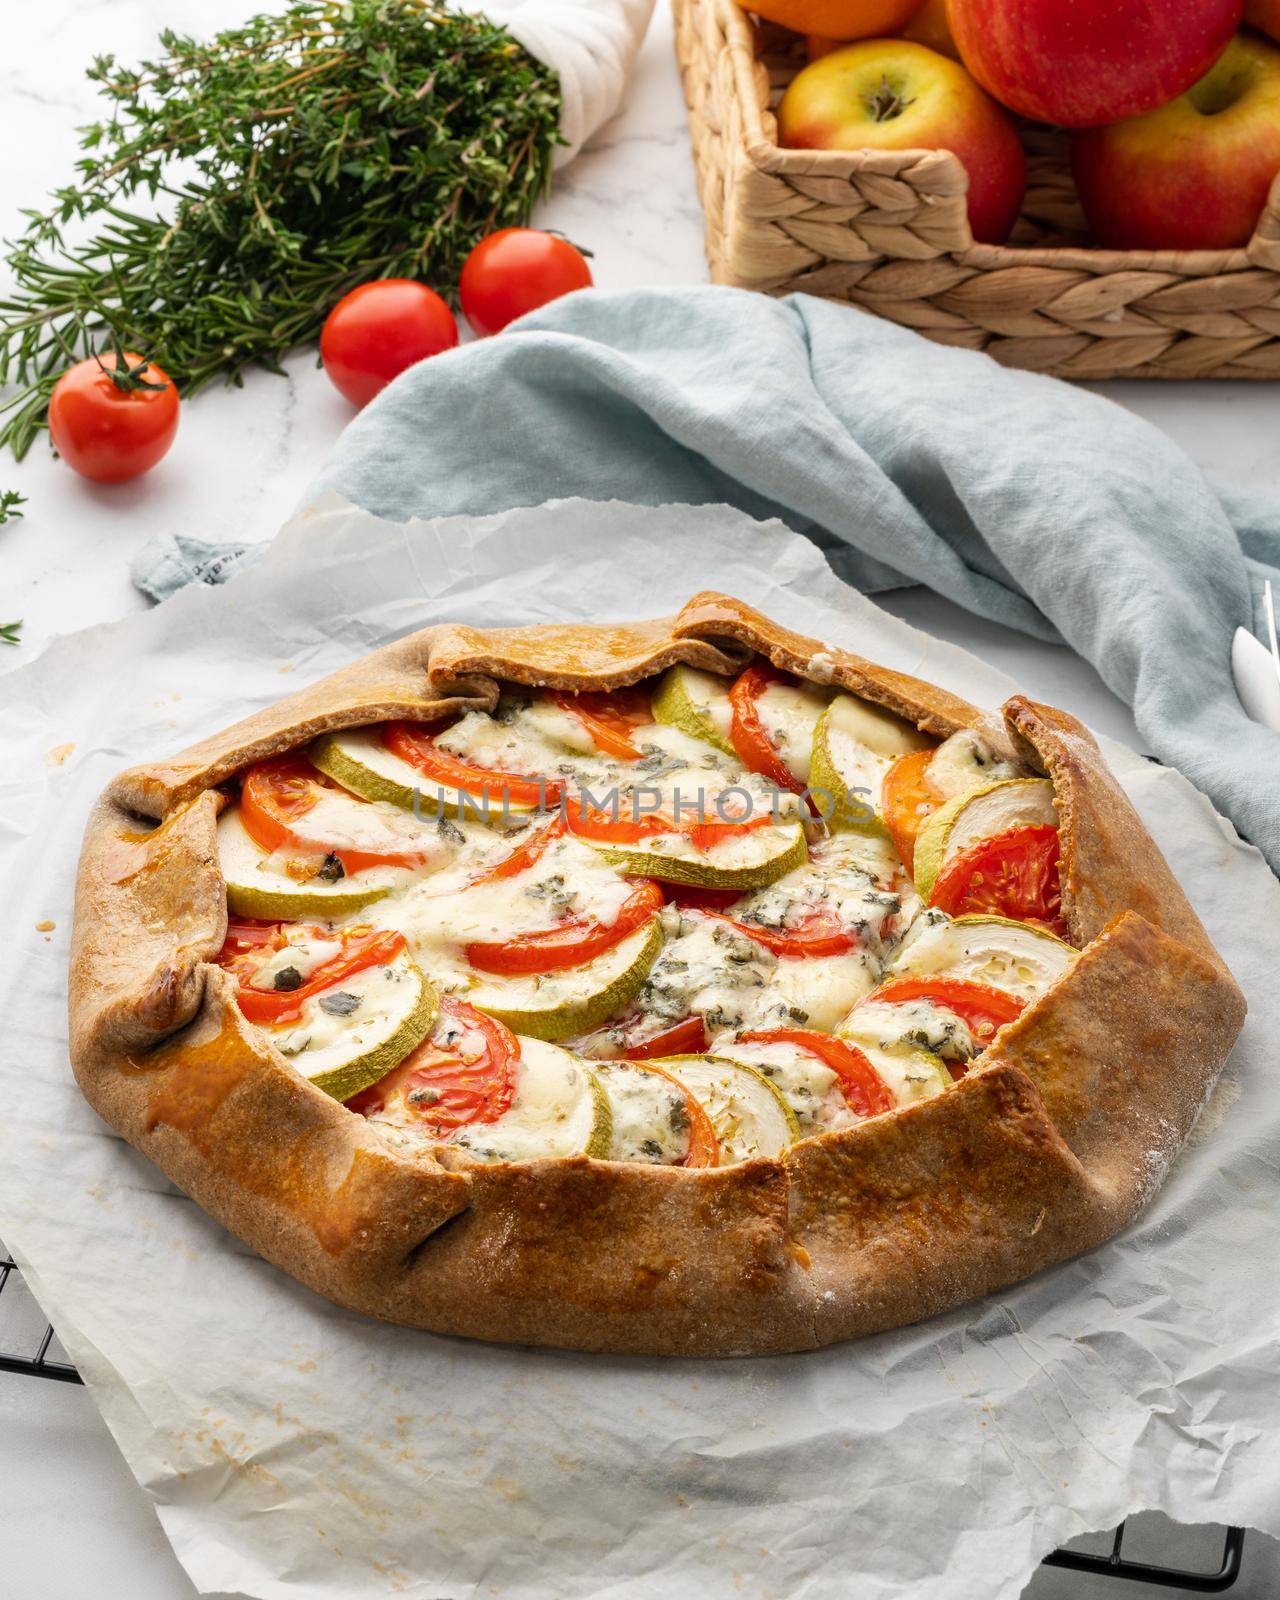 Homemade savory galette with vegetables, wholegrain pie with tomatoes, zucchini, blue cheese Gorgonzola. Rustic crust crostata on dark linen textile tablecloth. Vertical, side view